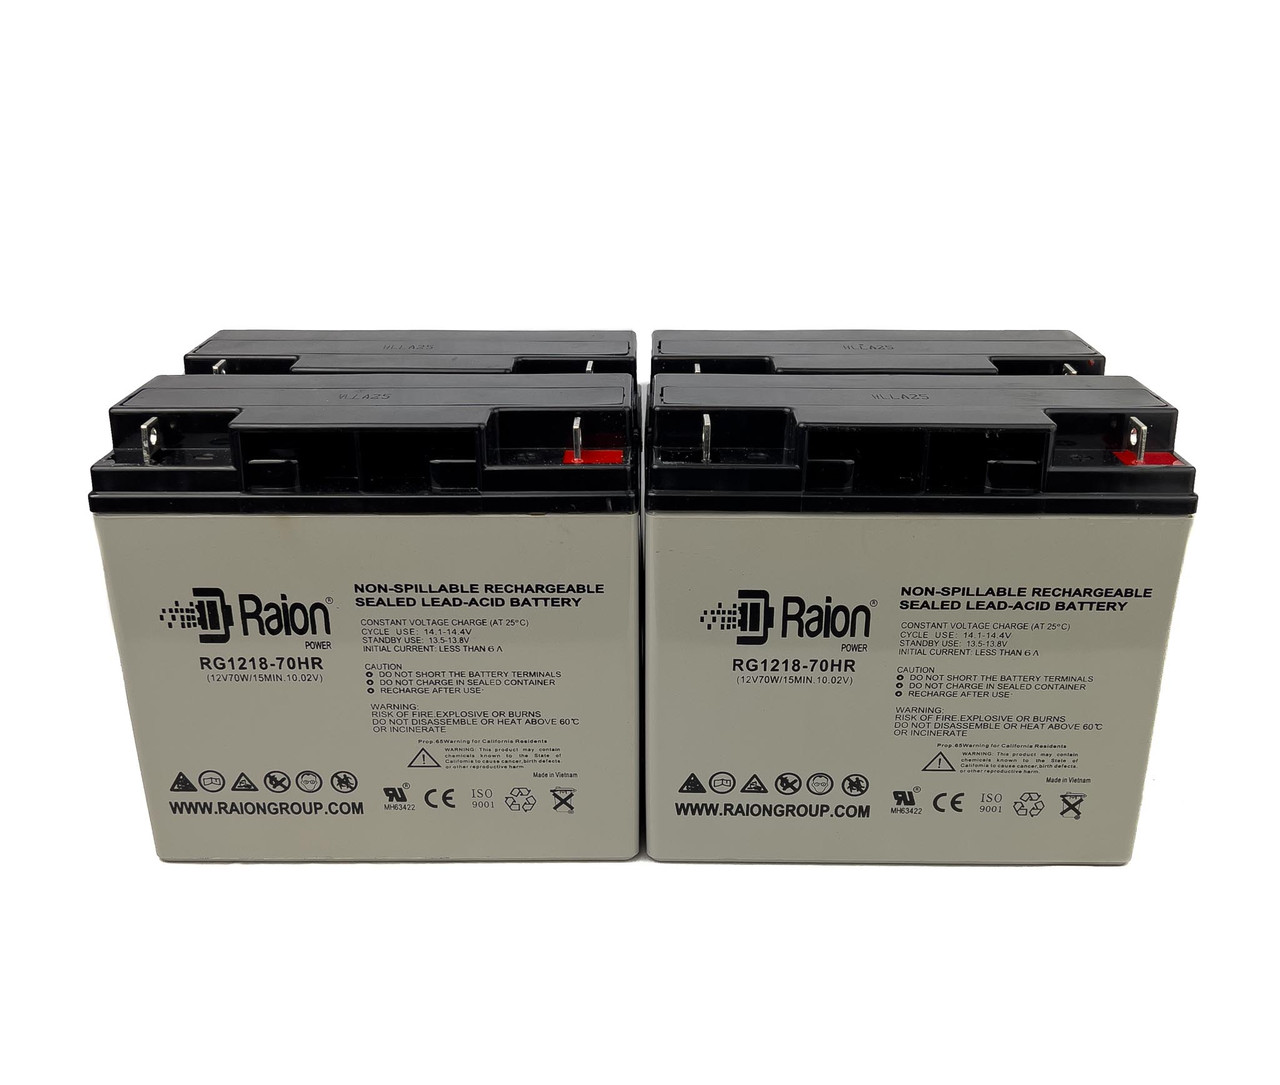 Raion Power RG1218-70HR 12V 18Ah Replacement UPS Battery for MGE Pulsar SV20 - 4 Pack